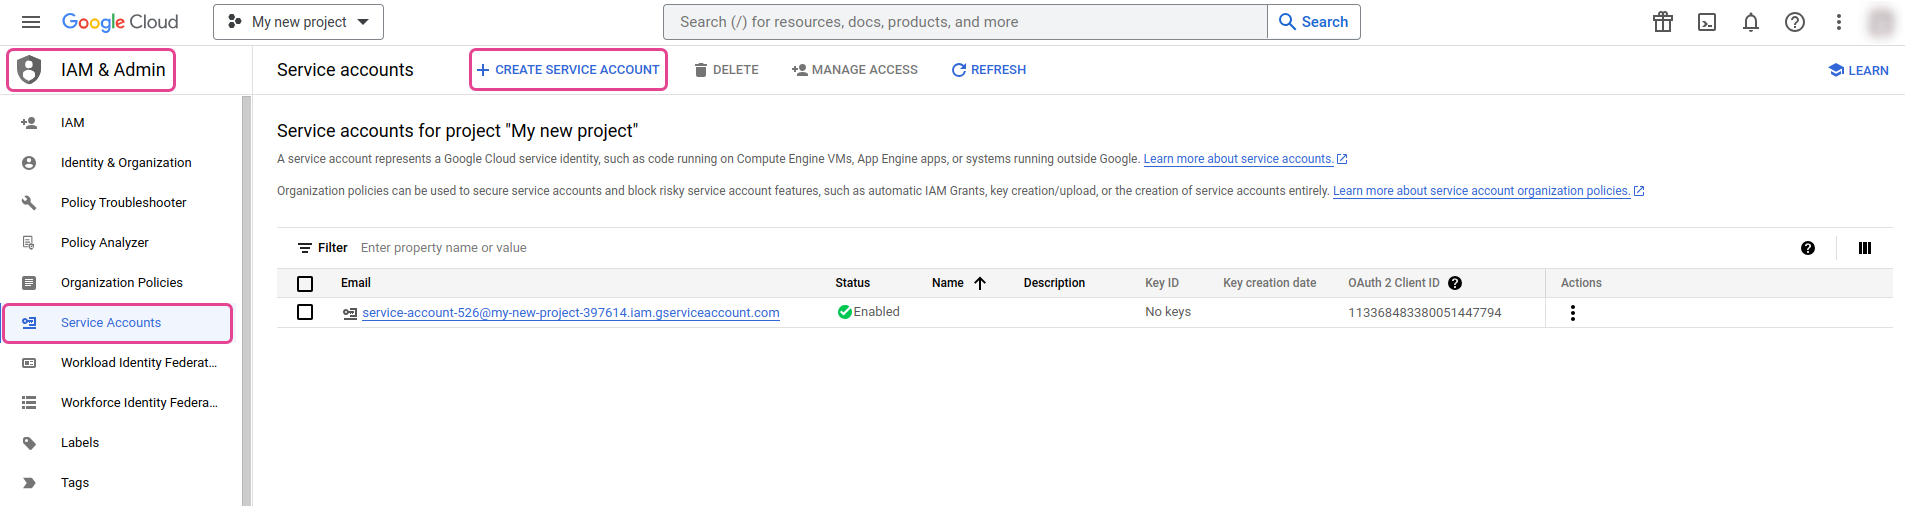 bigquery article1 service account creation